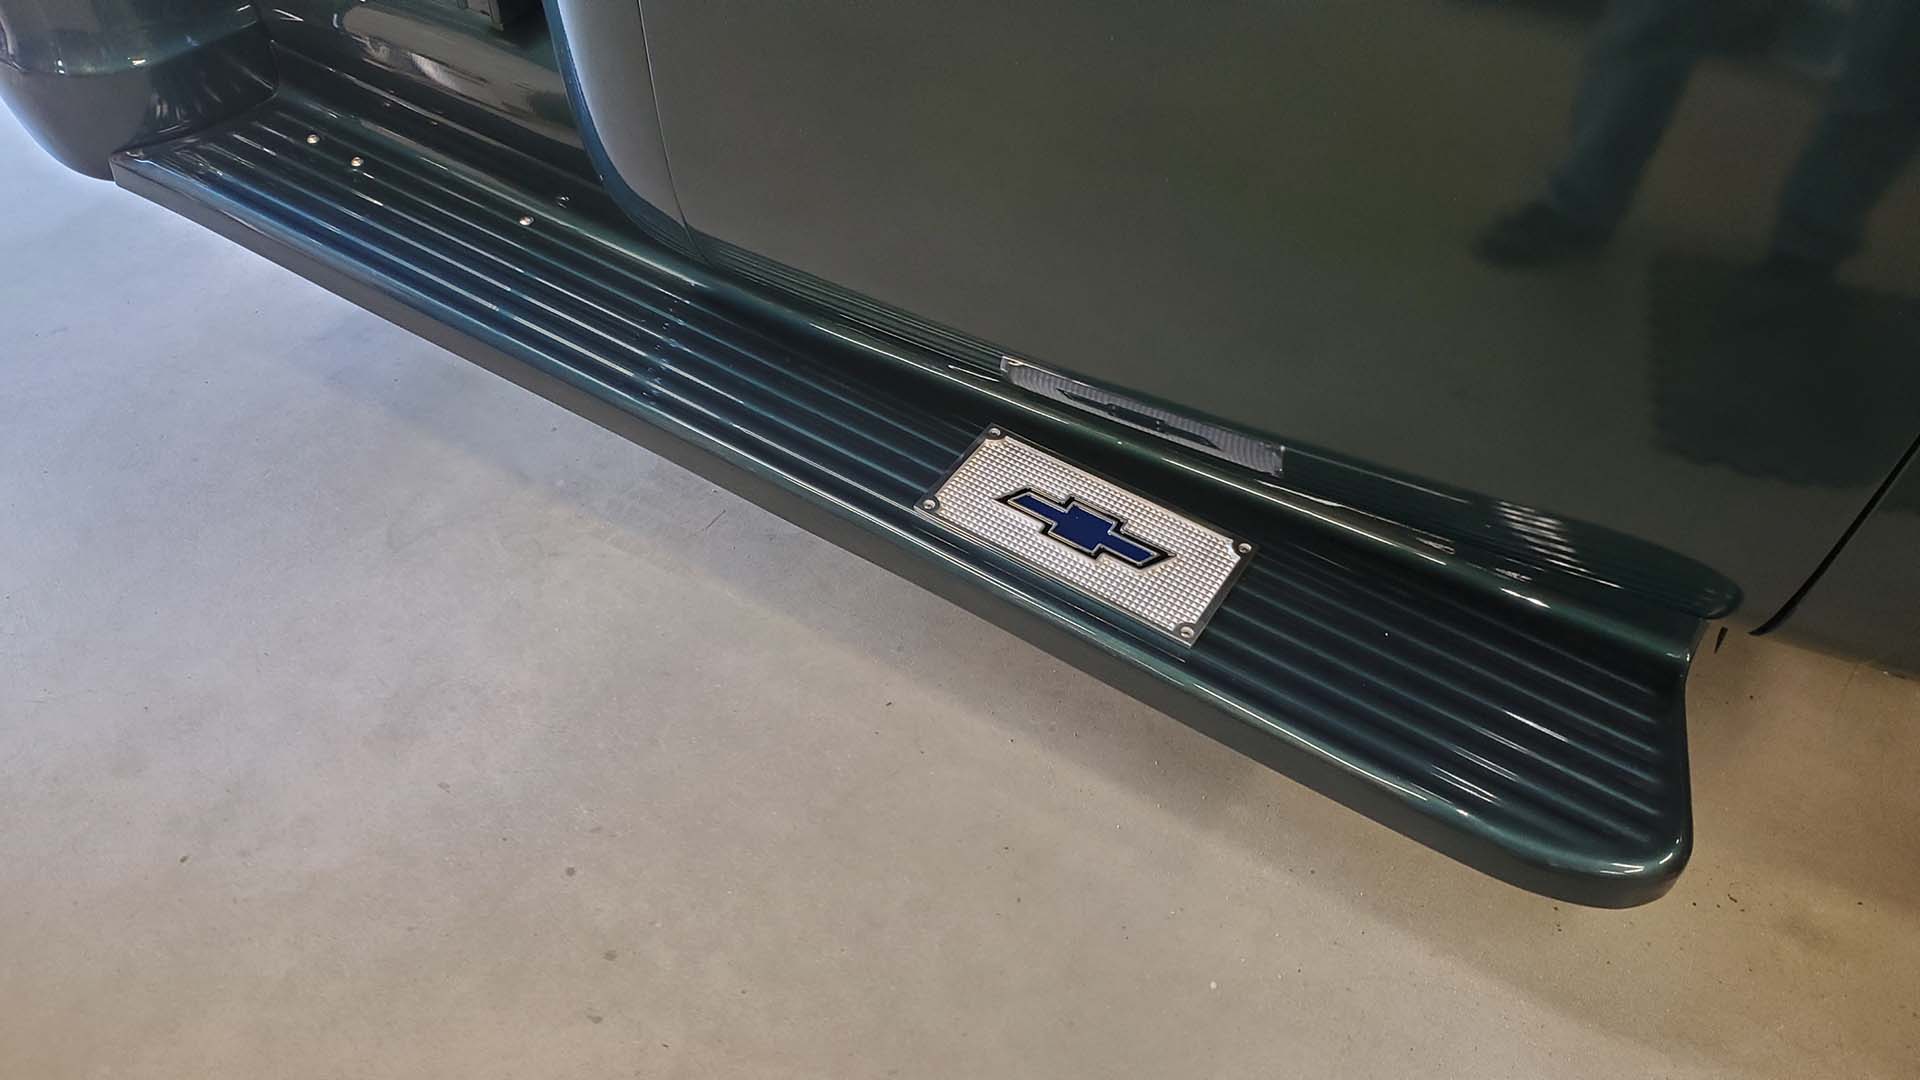 Aluminum step plates help protect the running boards